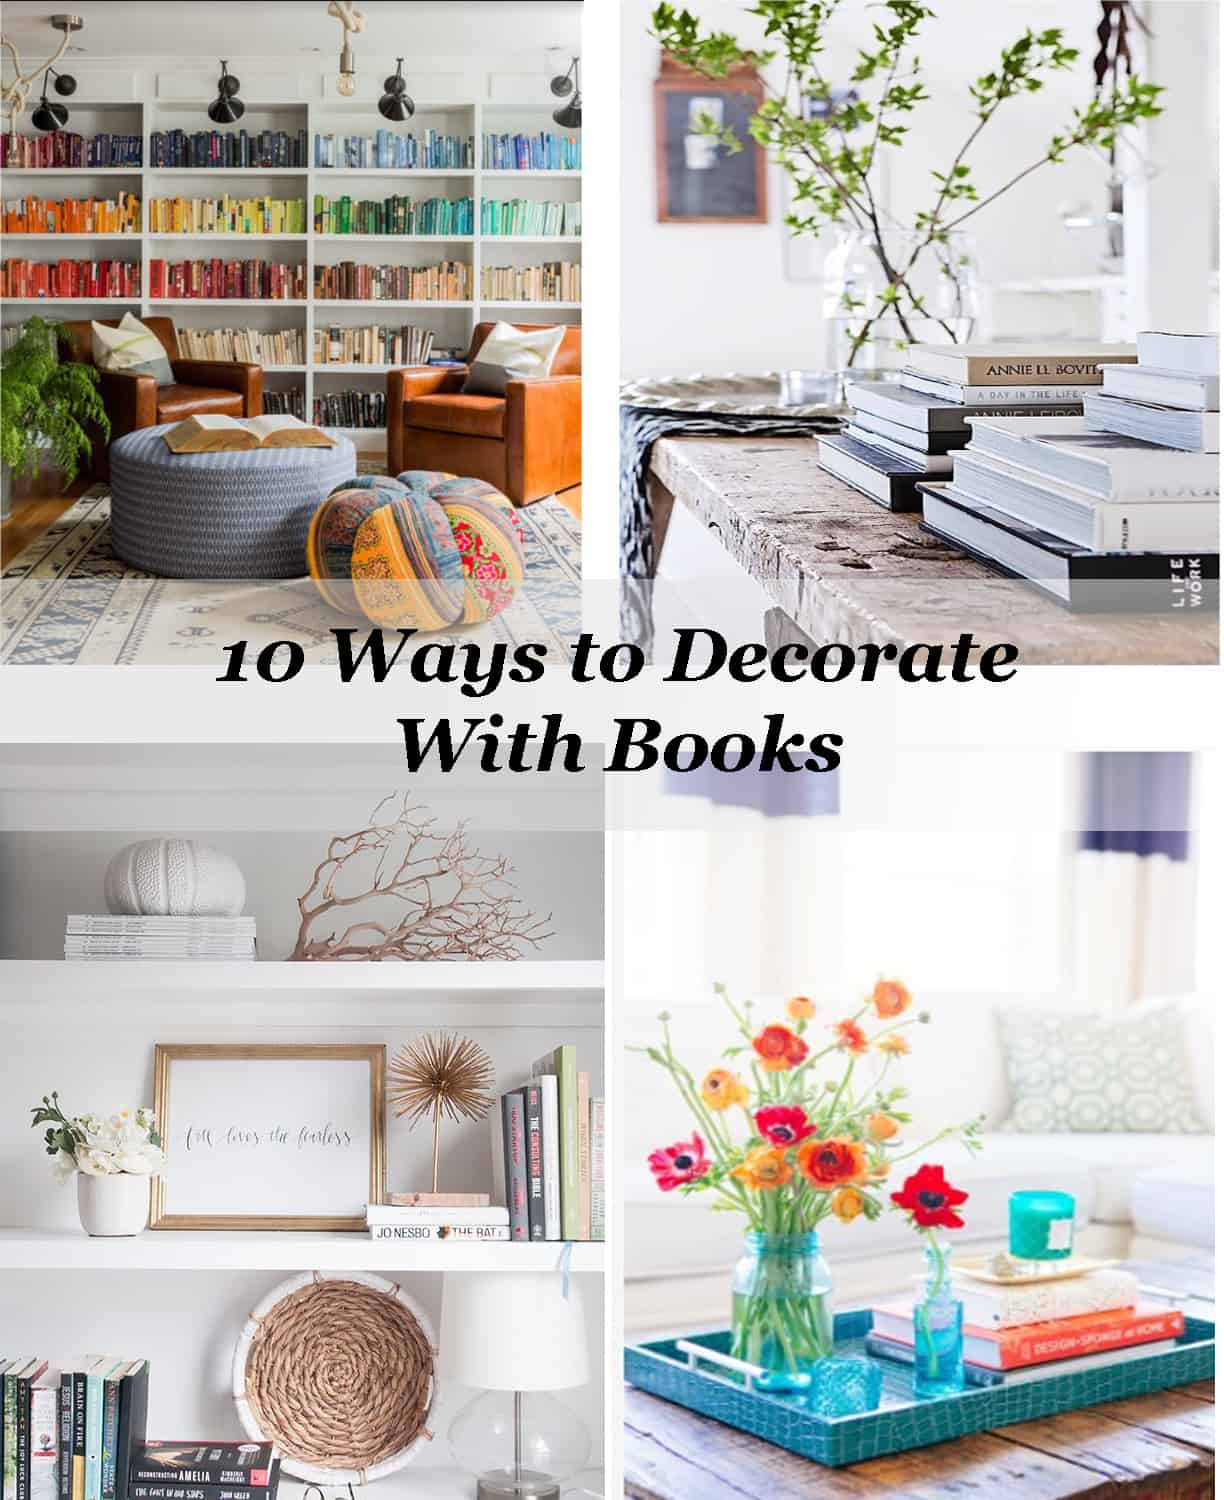 Decorating with books - The Honeycomb Home